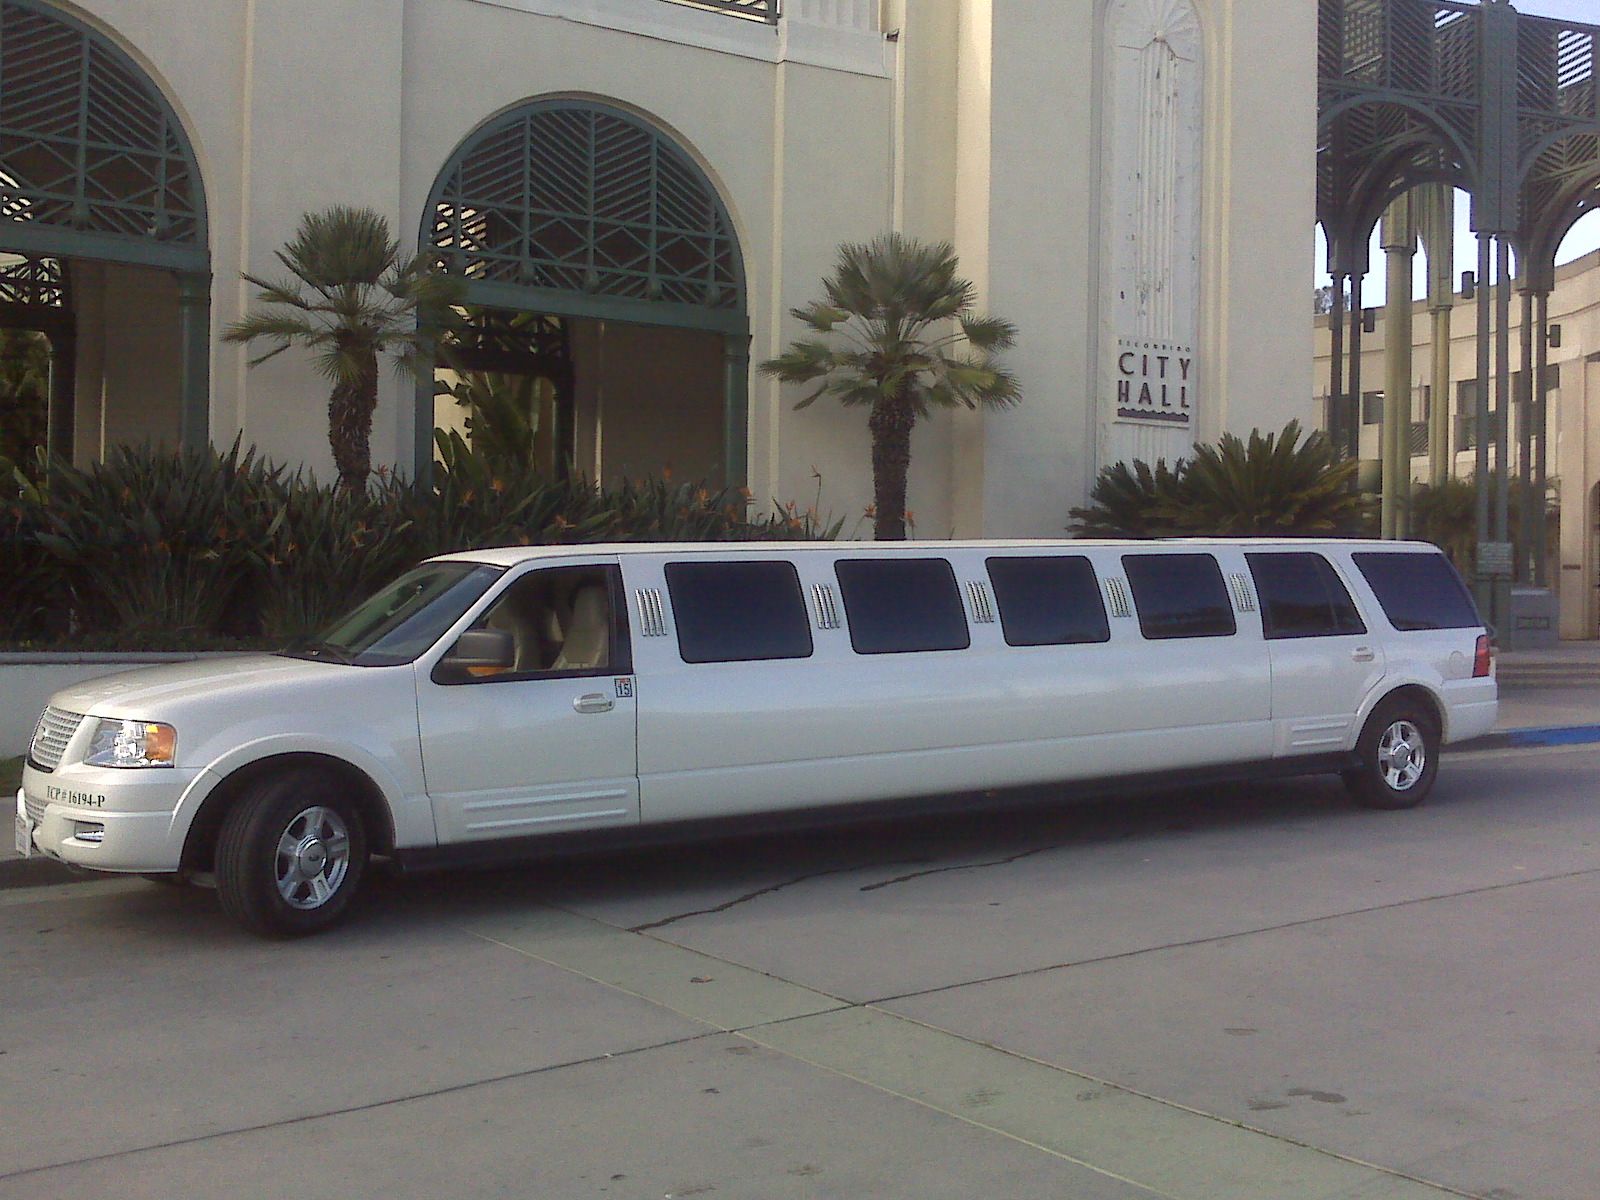 Top Most Beautiful And Amazing Limousine Car Wallpaper In HD